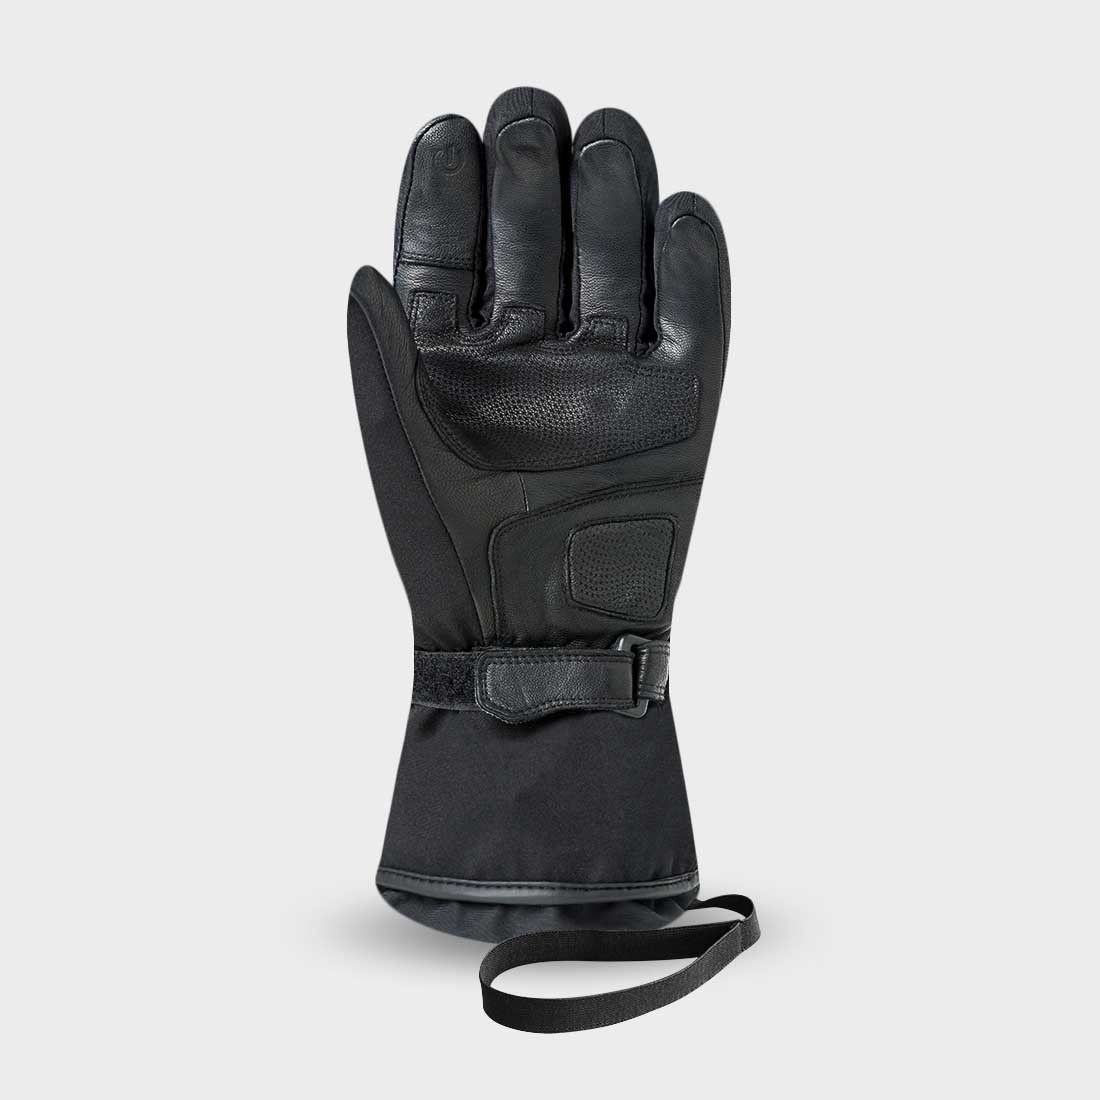 CONNECTIC 4 W - Heated ski and motorcycle gloves